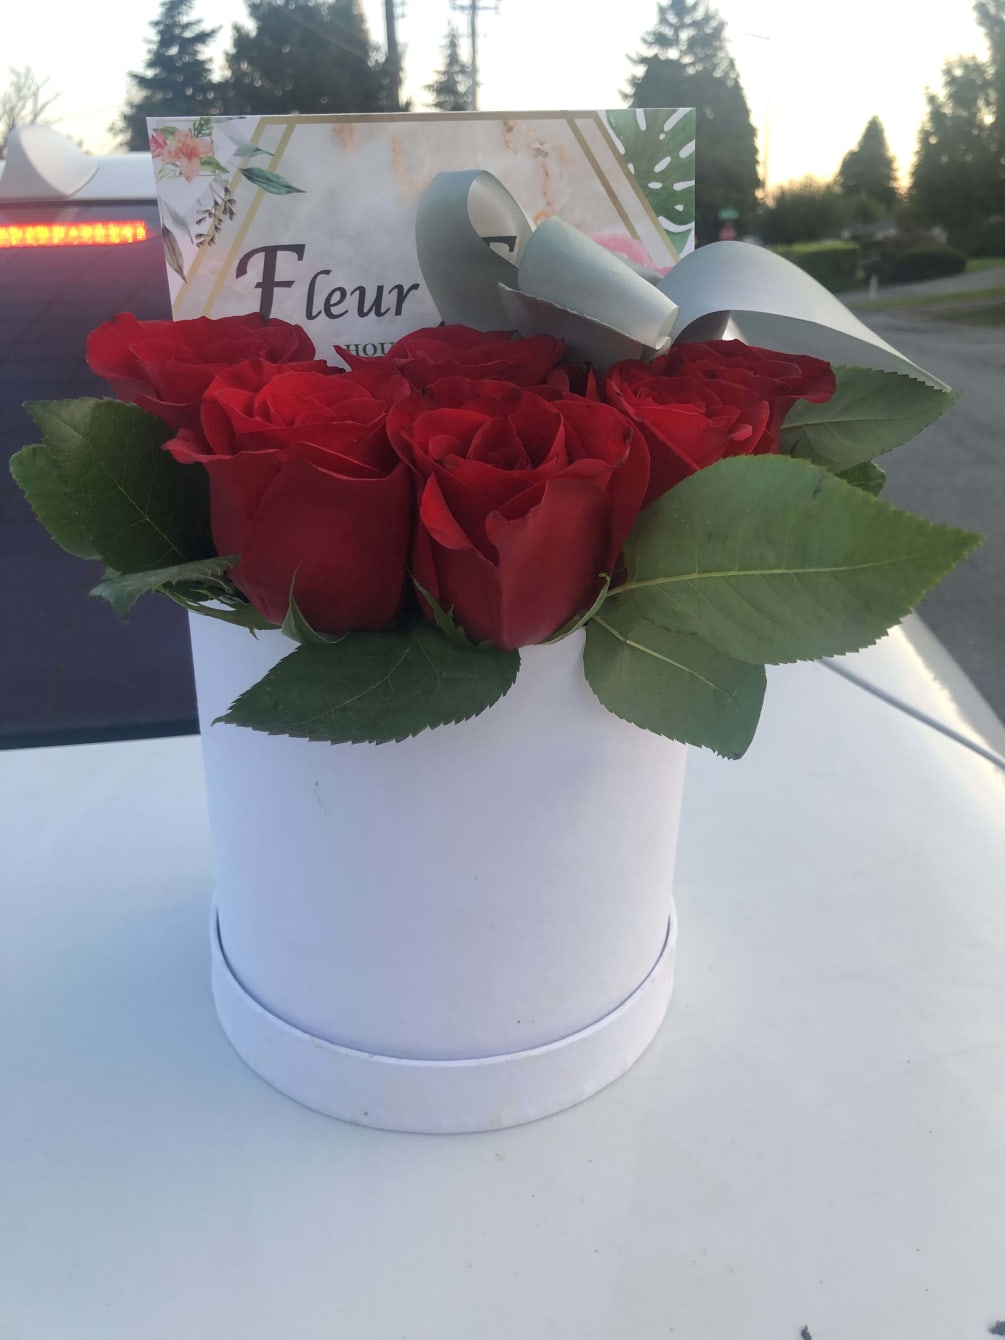 The most elegant way to give a dozen roses. 

We will choose